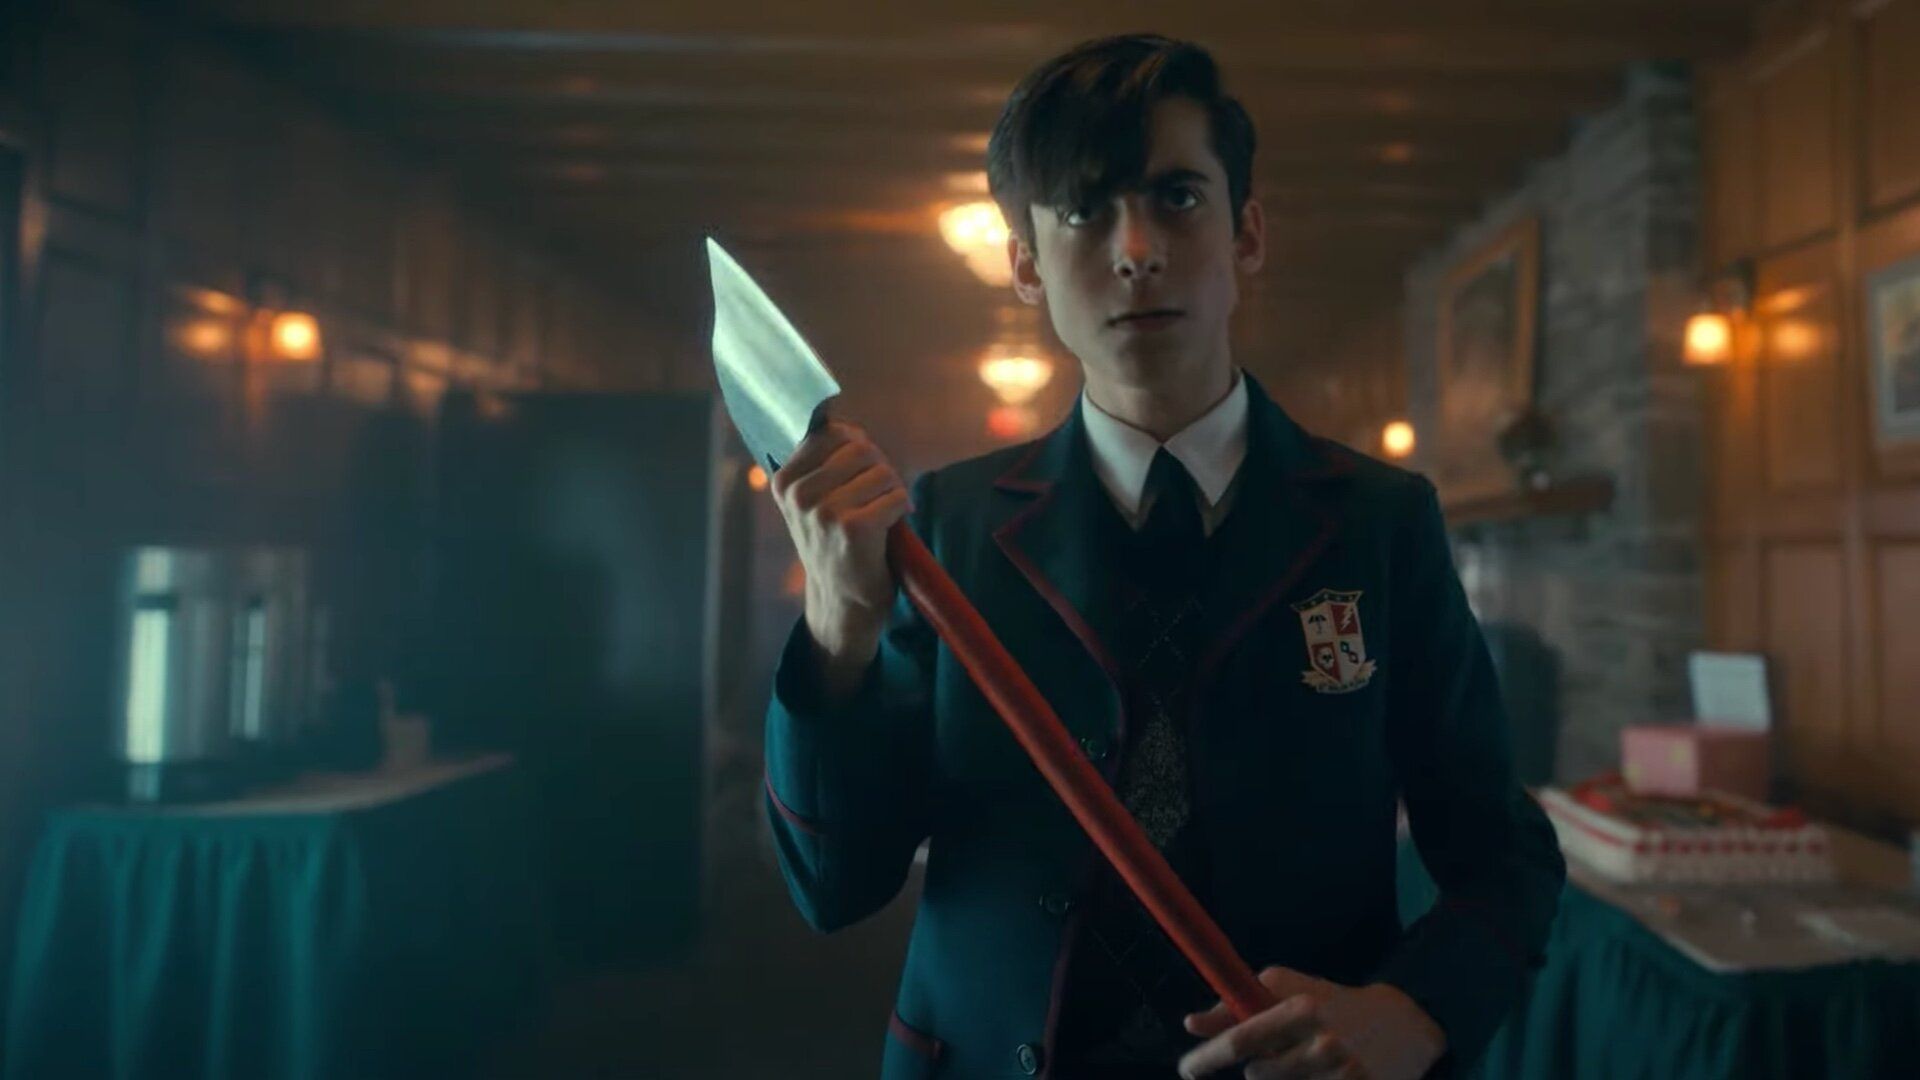 Wild and Exciting for THE UMBRELLA ACADEMY Season 2